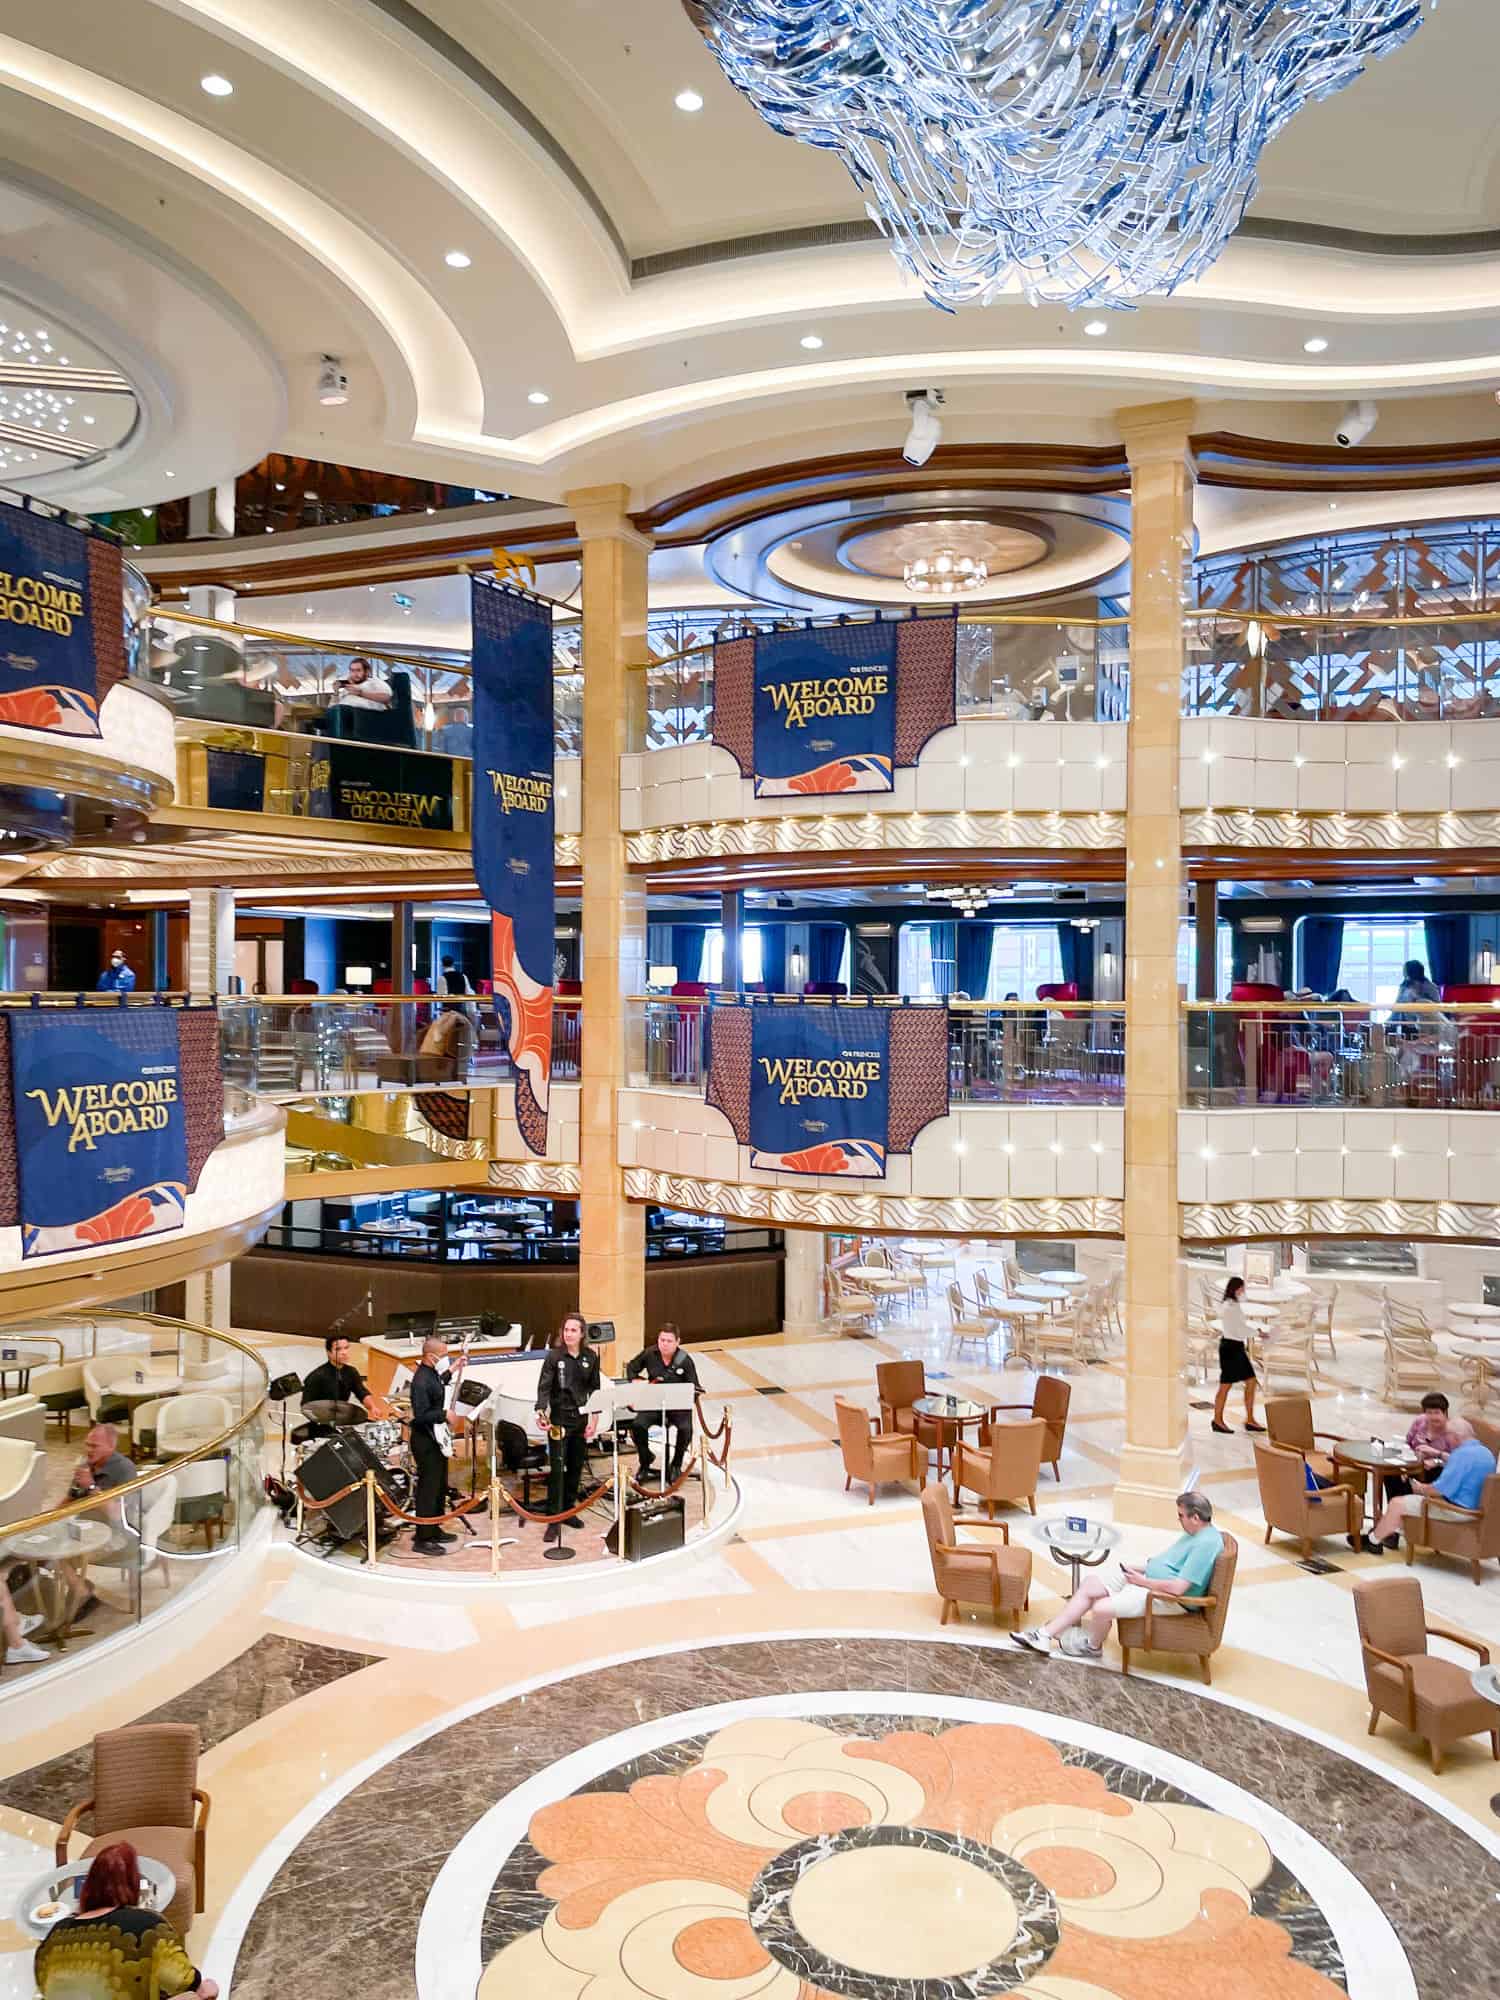 Discovery Princess Review - Piazza Welcome Aboard with live music